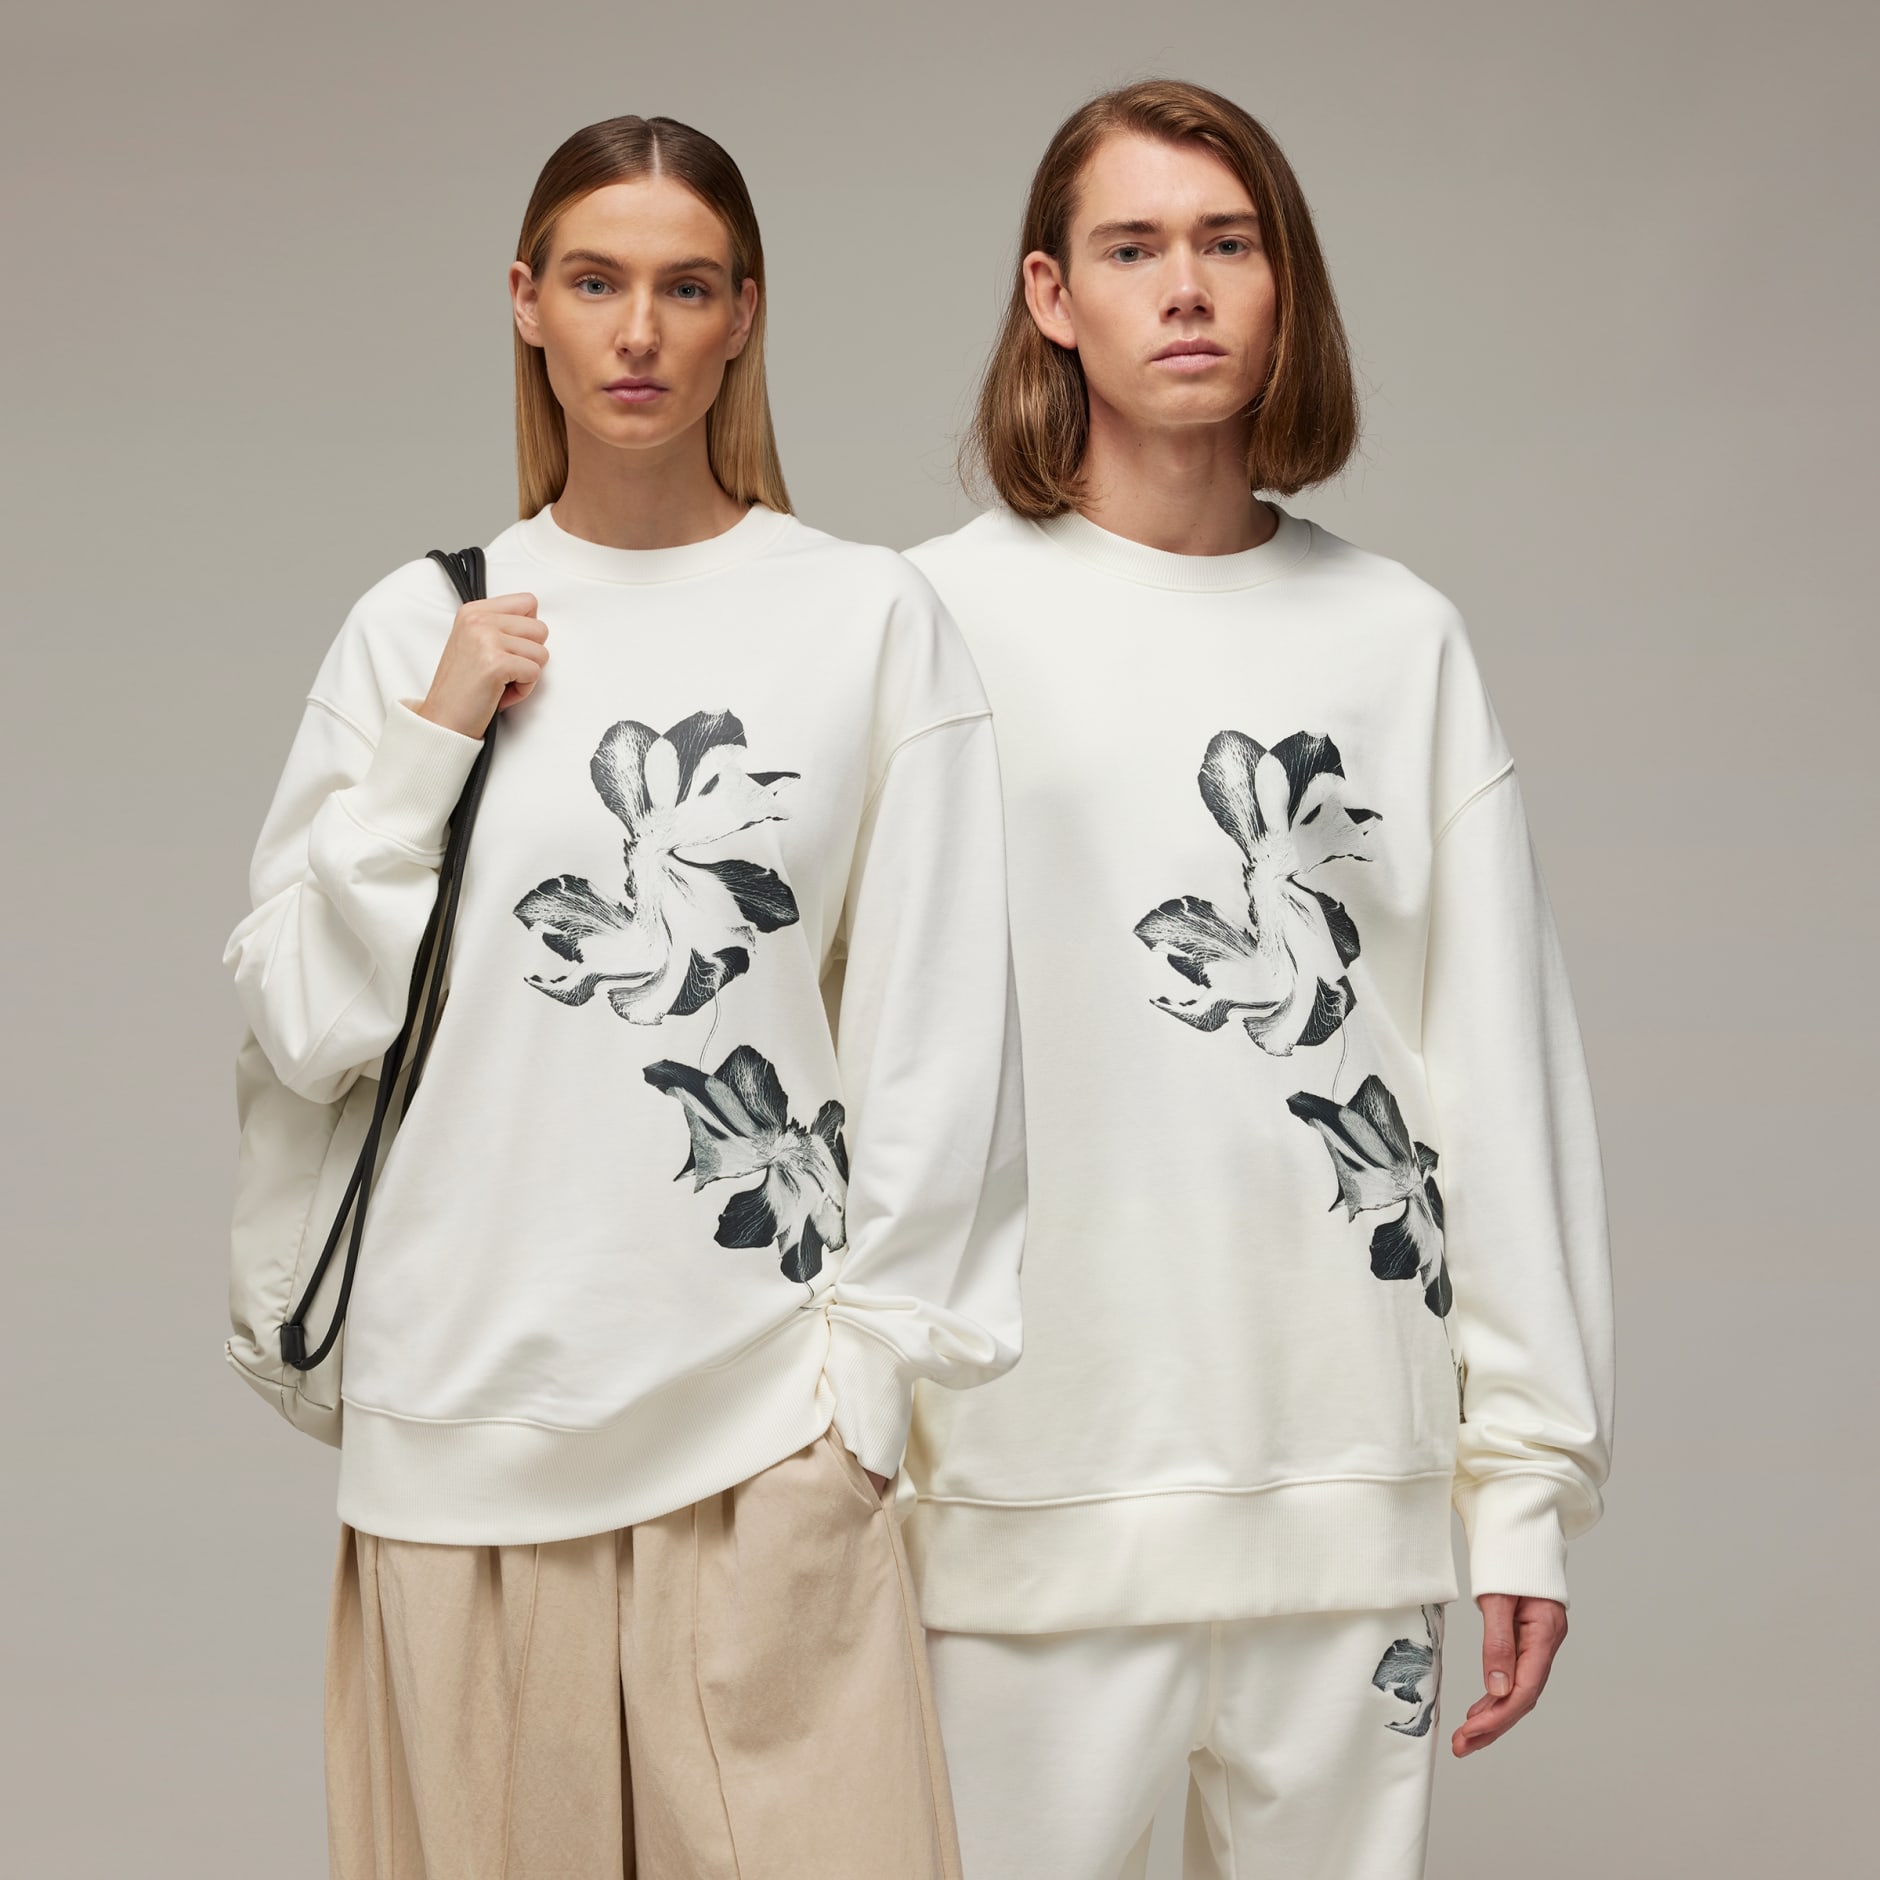 All products - Y-3 Graphic French Terry Crew Sweater - White | adidas ...